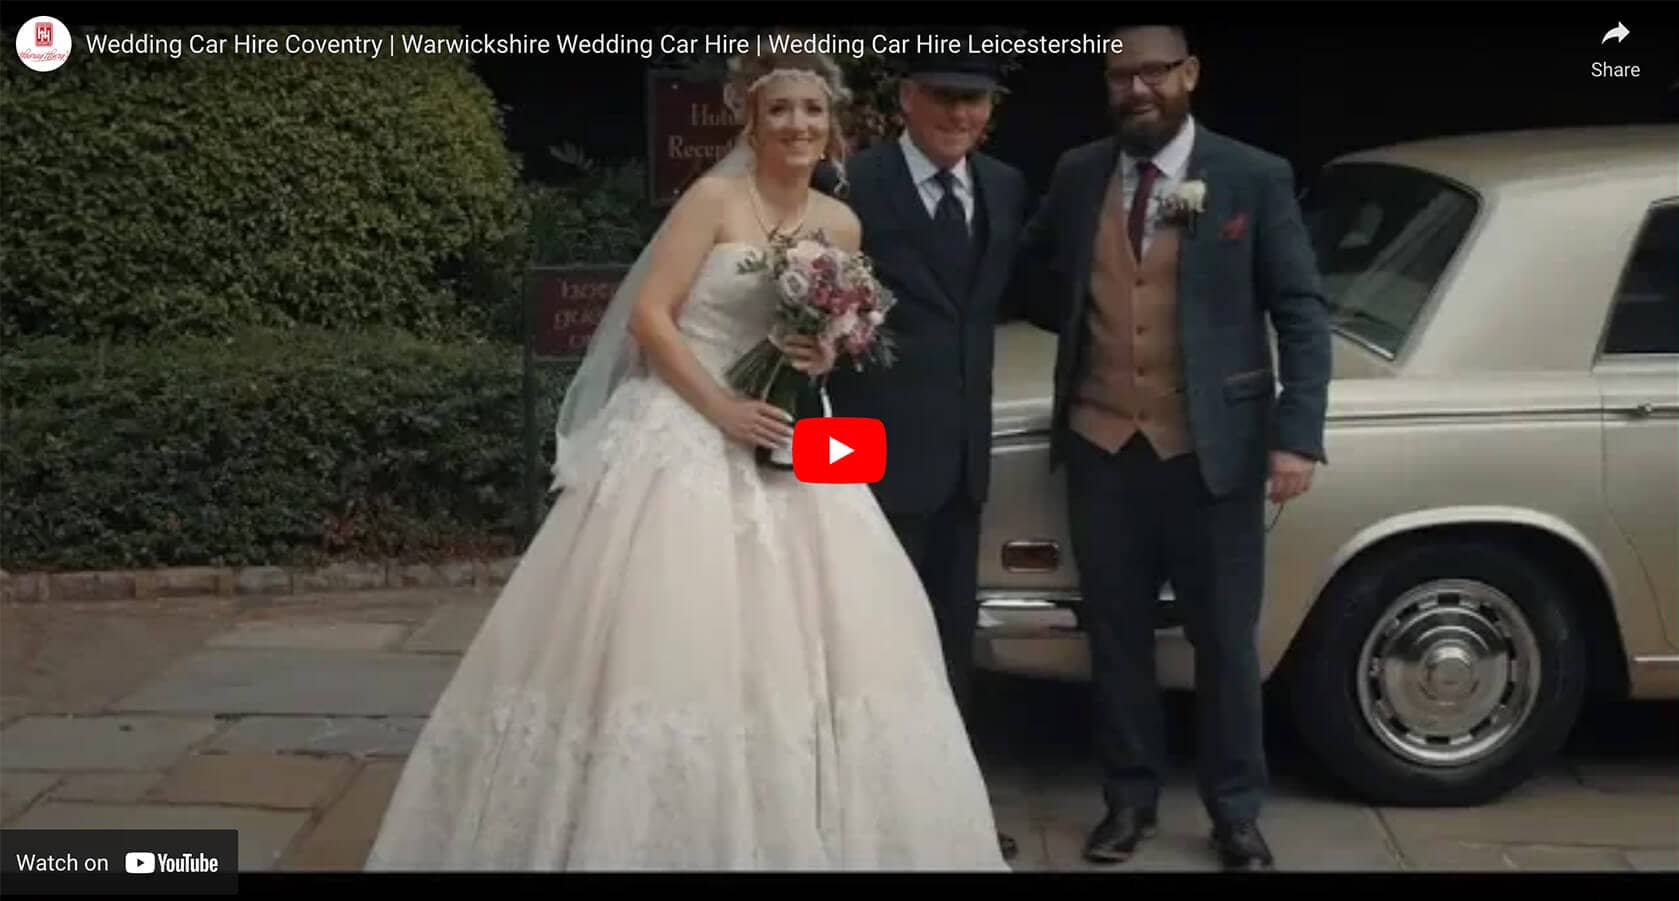 Wedding Car Hire Coventry